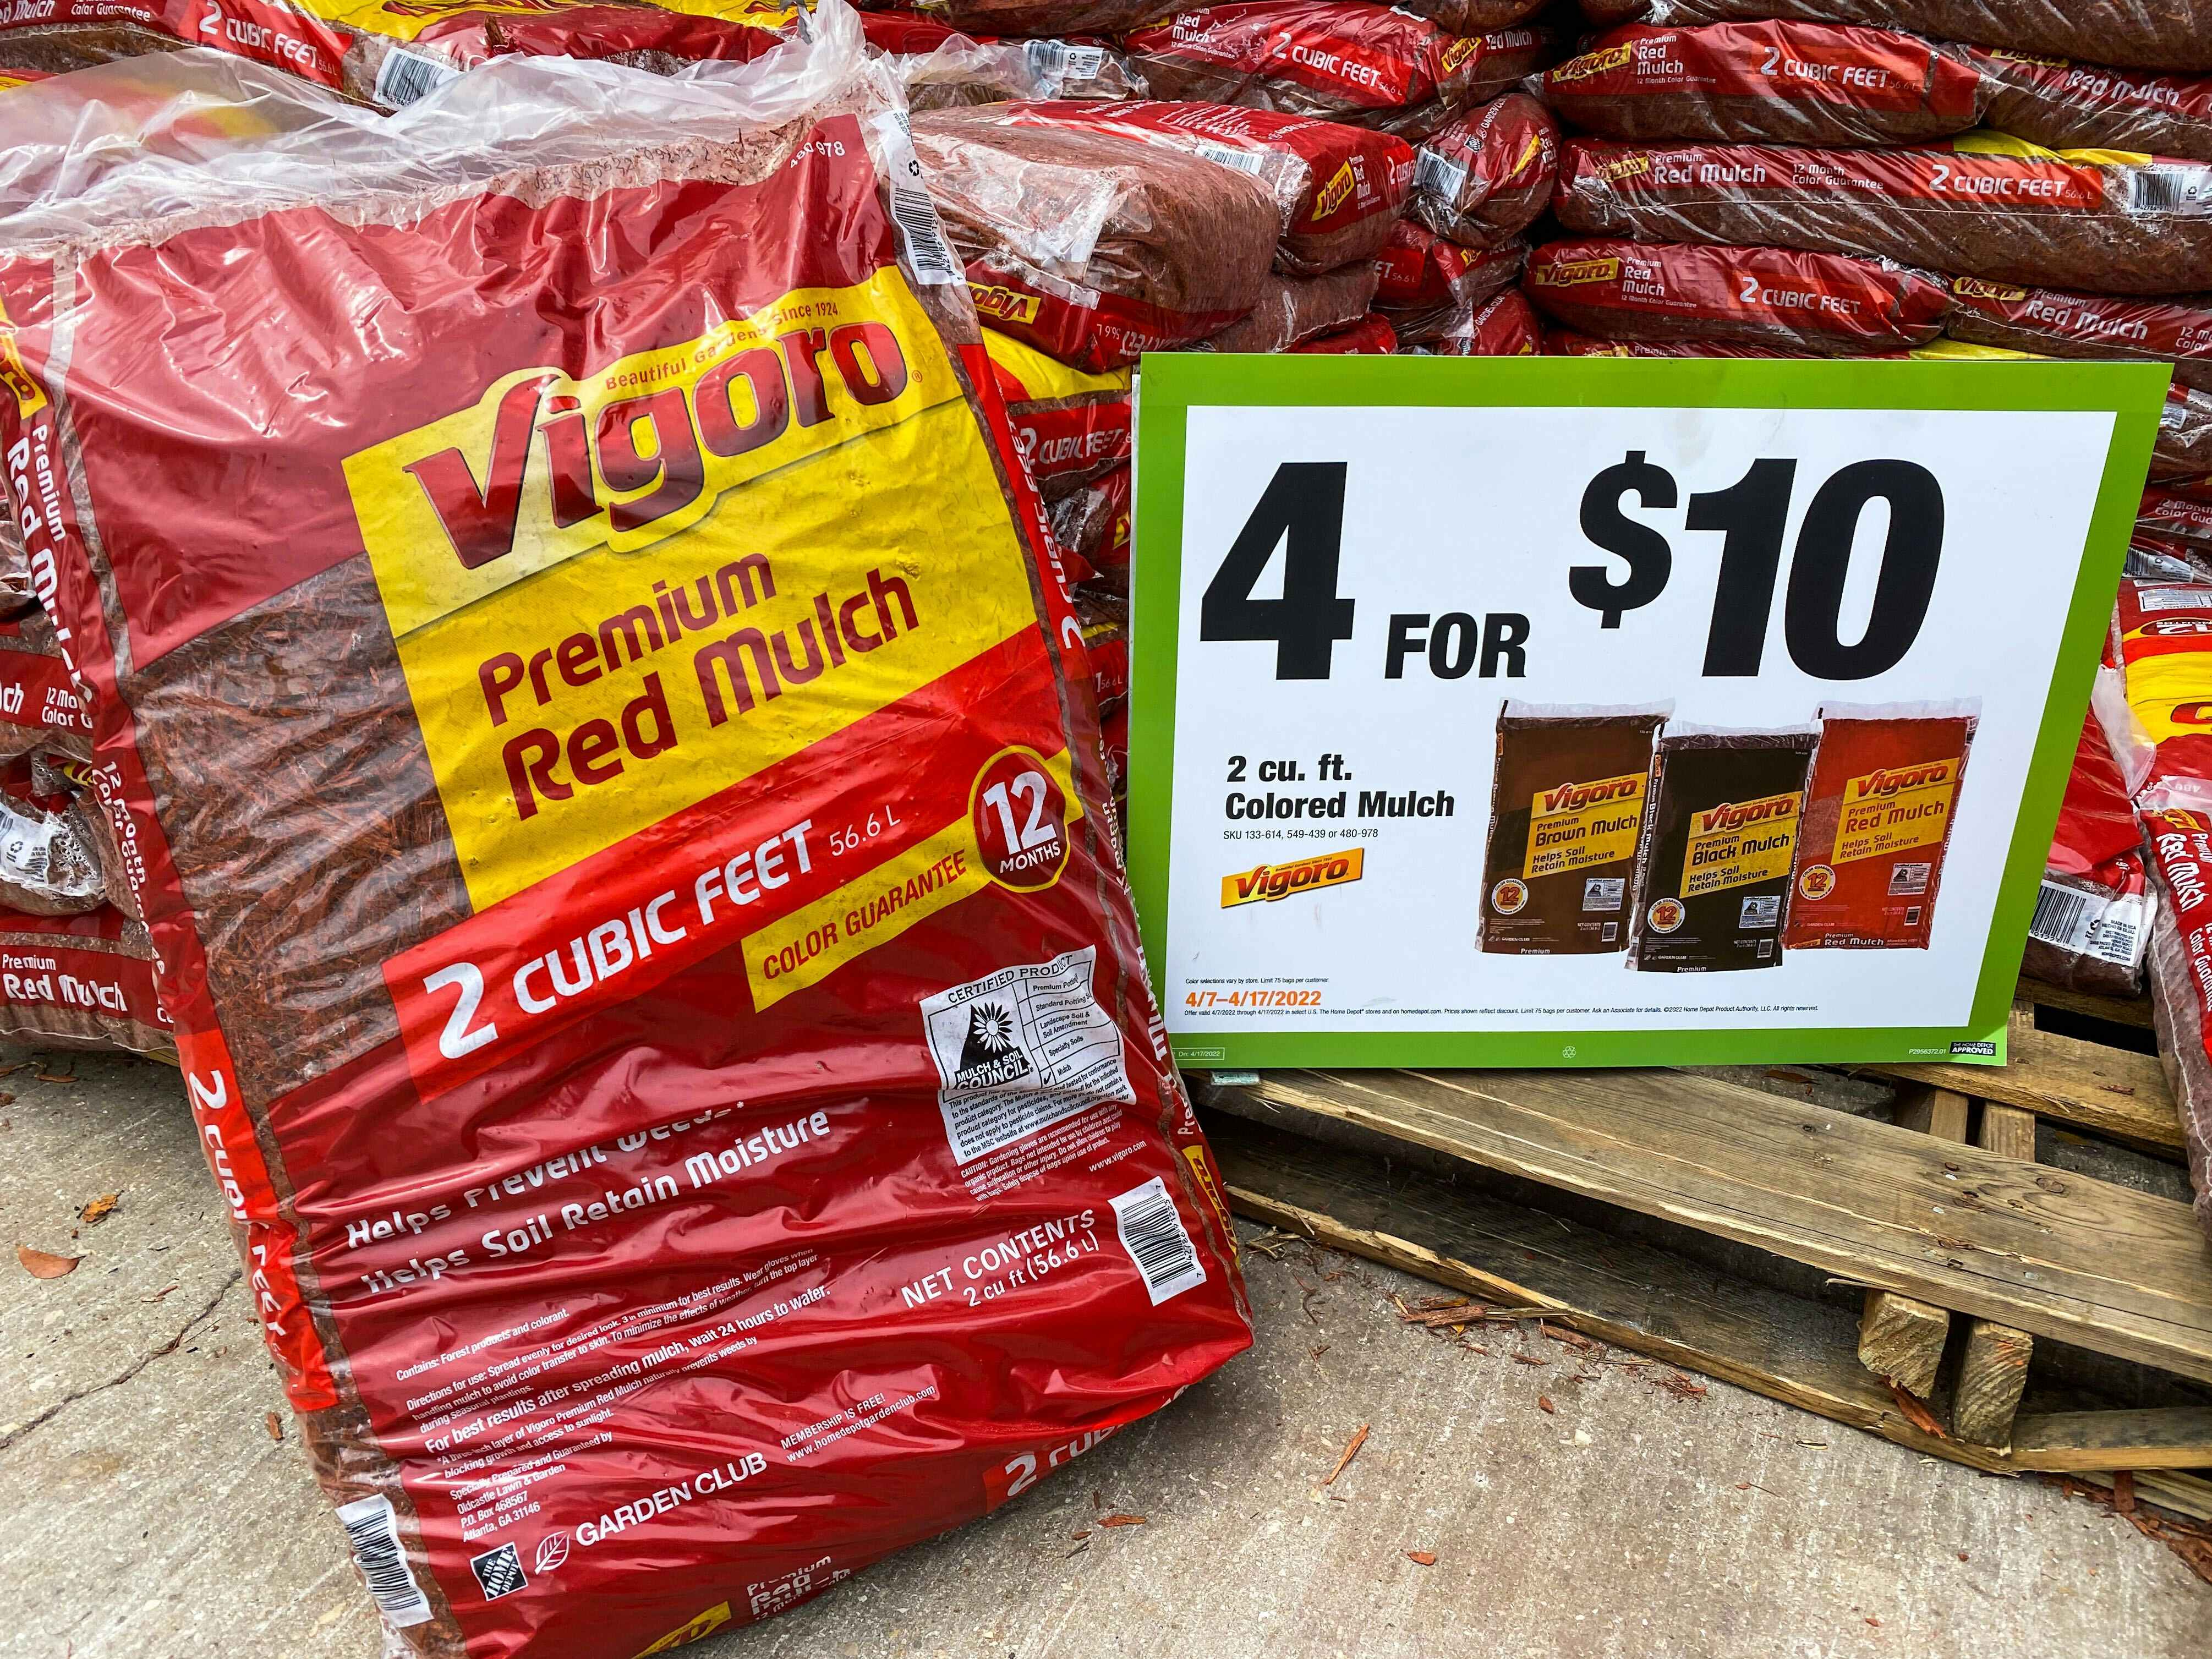 A bag of vigoro red mulch next to a 4 for $10